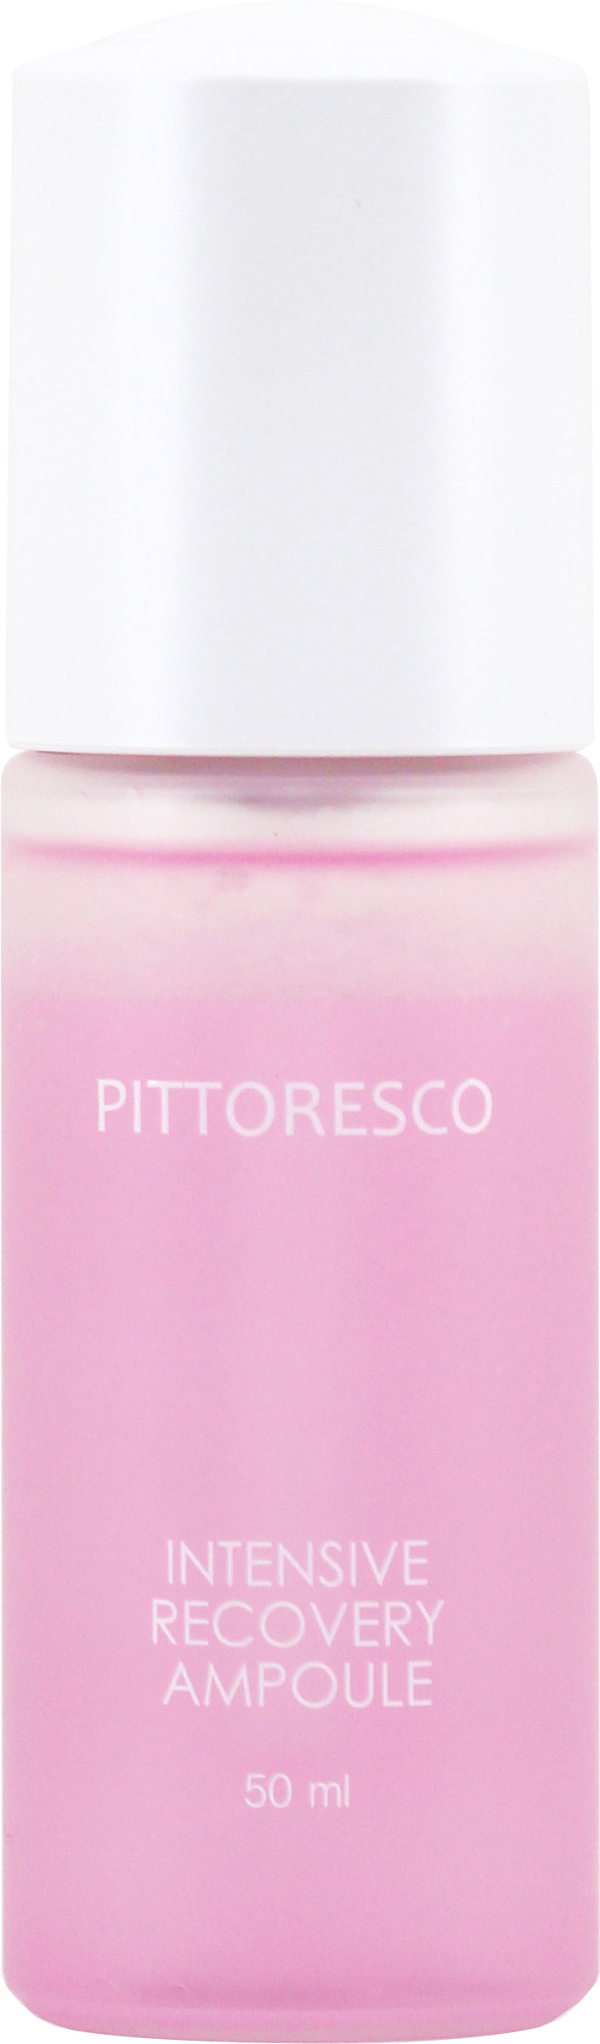 [Pittoresco] recovery ampoule - glass skin.